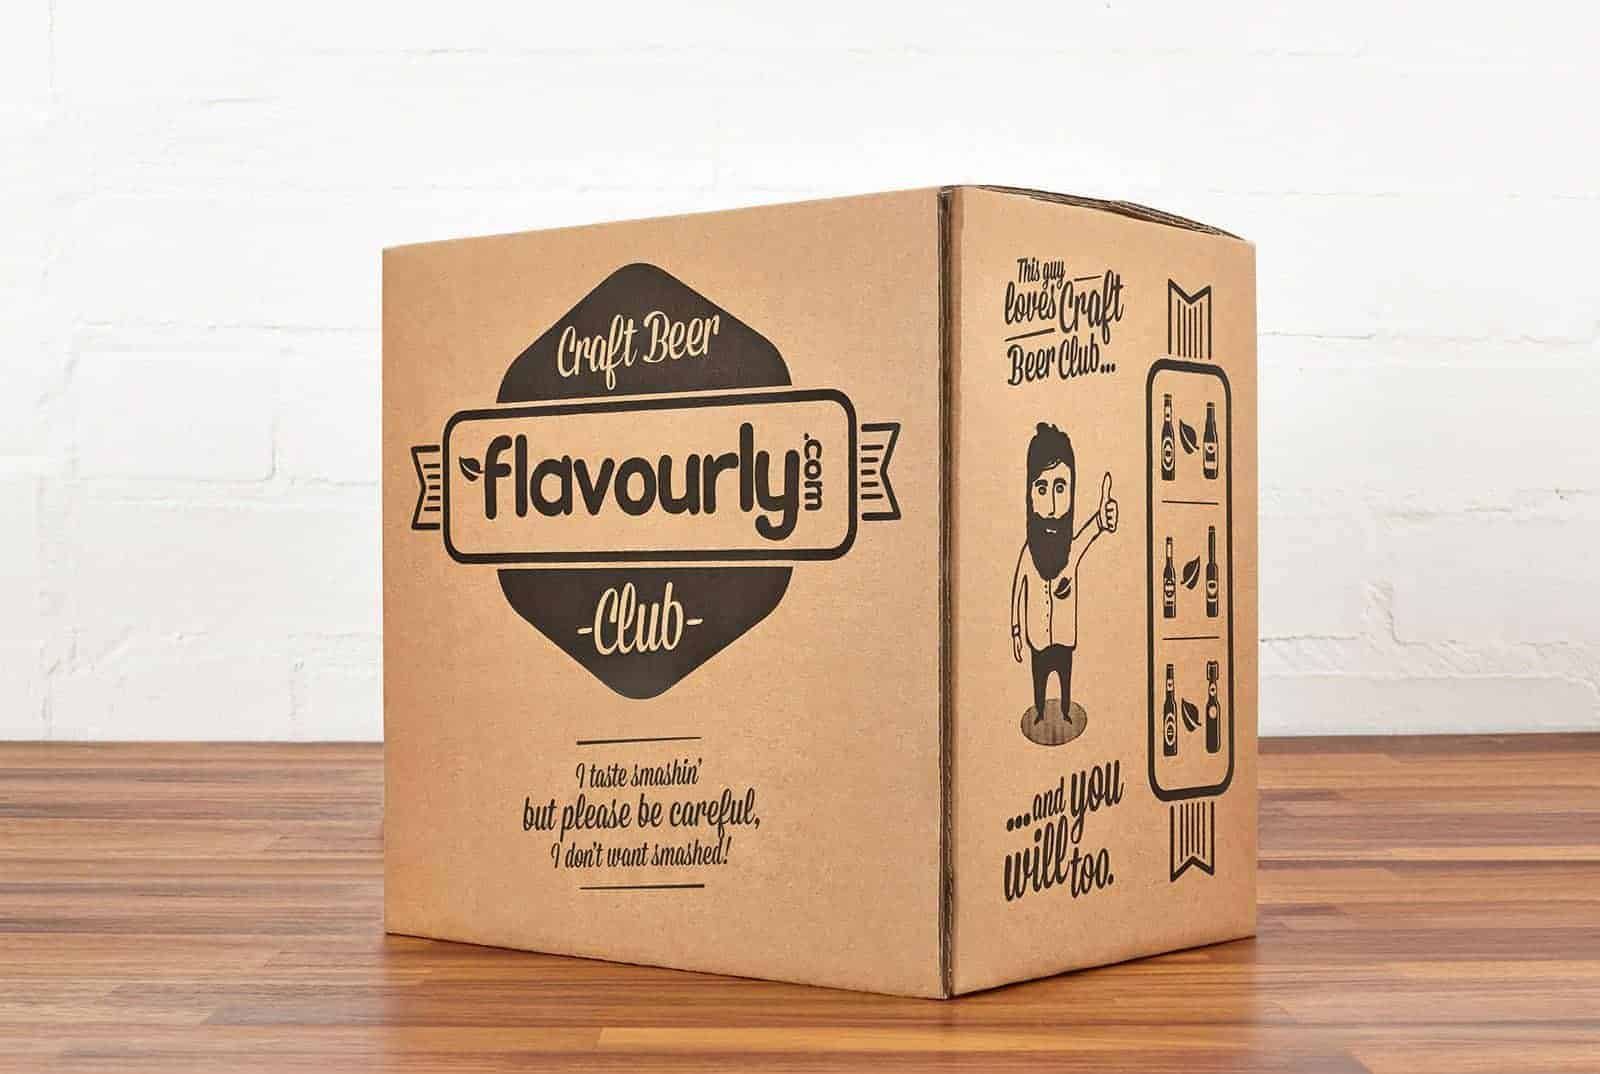 Flavourly Craft Beer Club